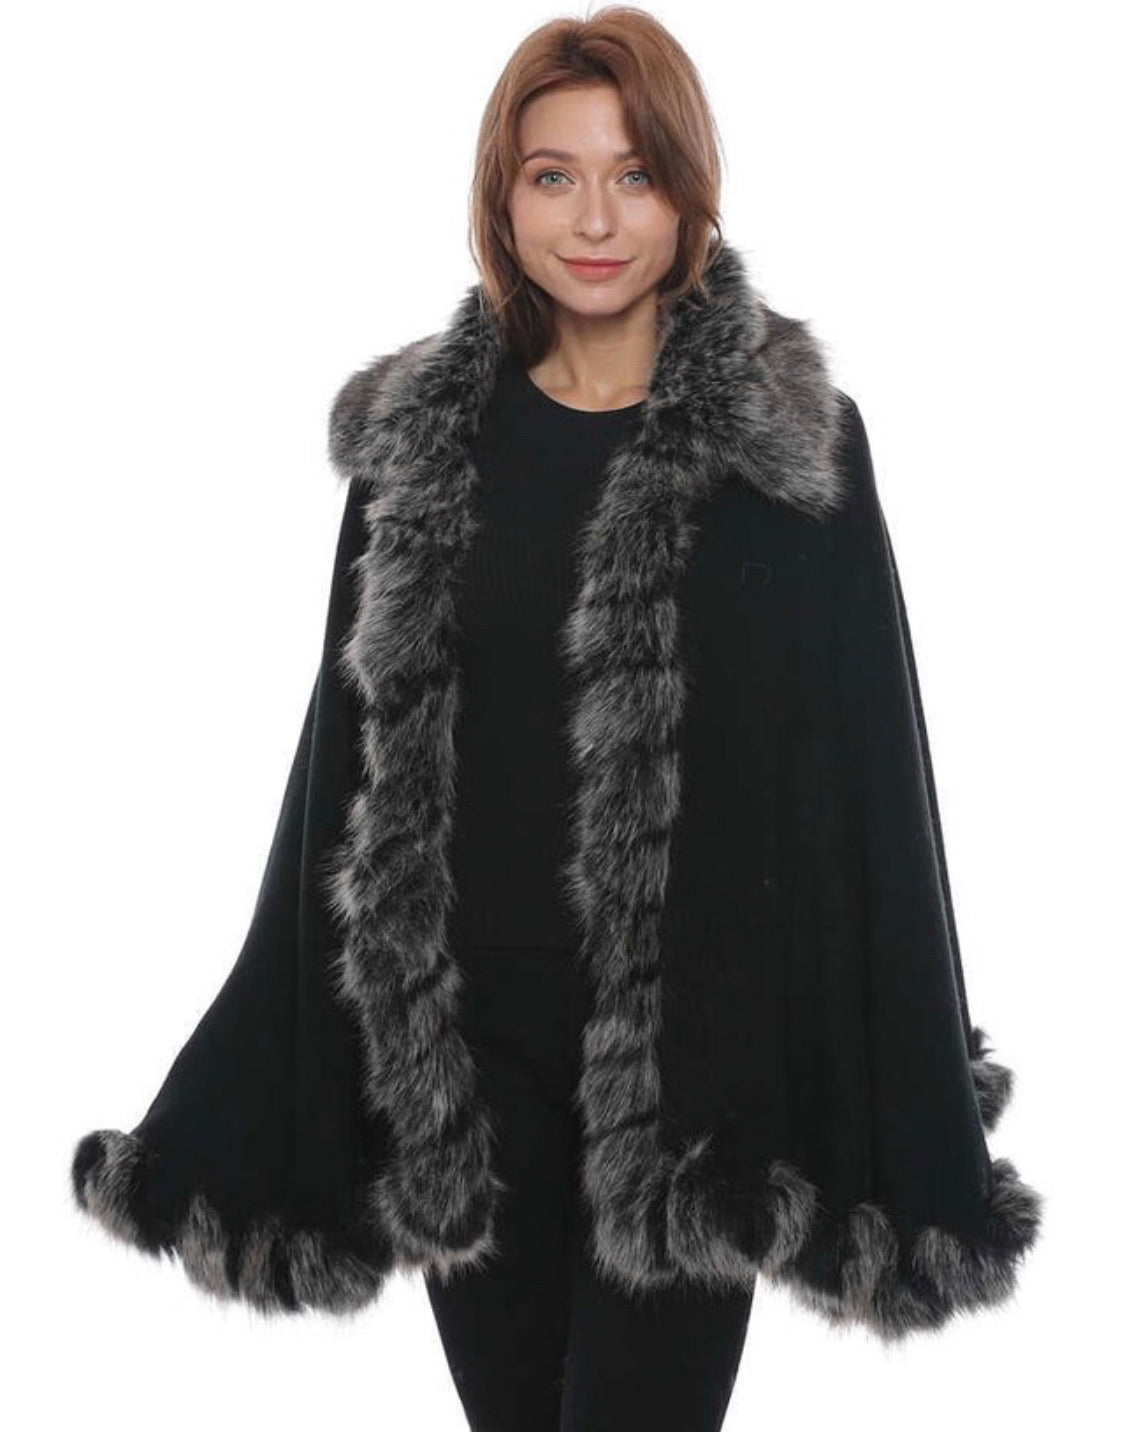 Black cape with grey collar and trim